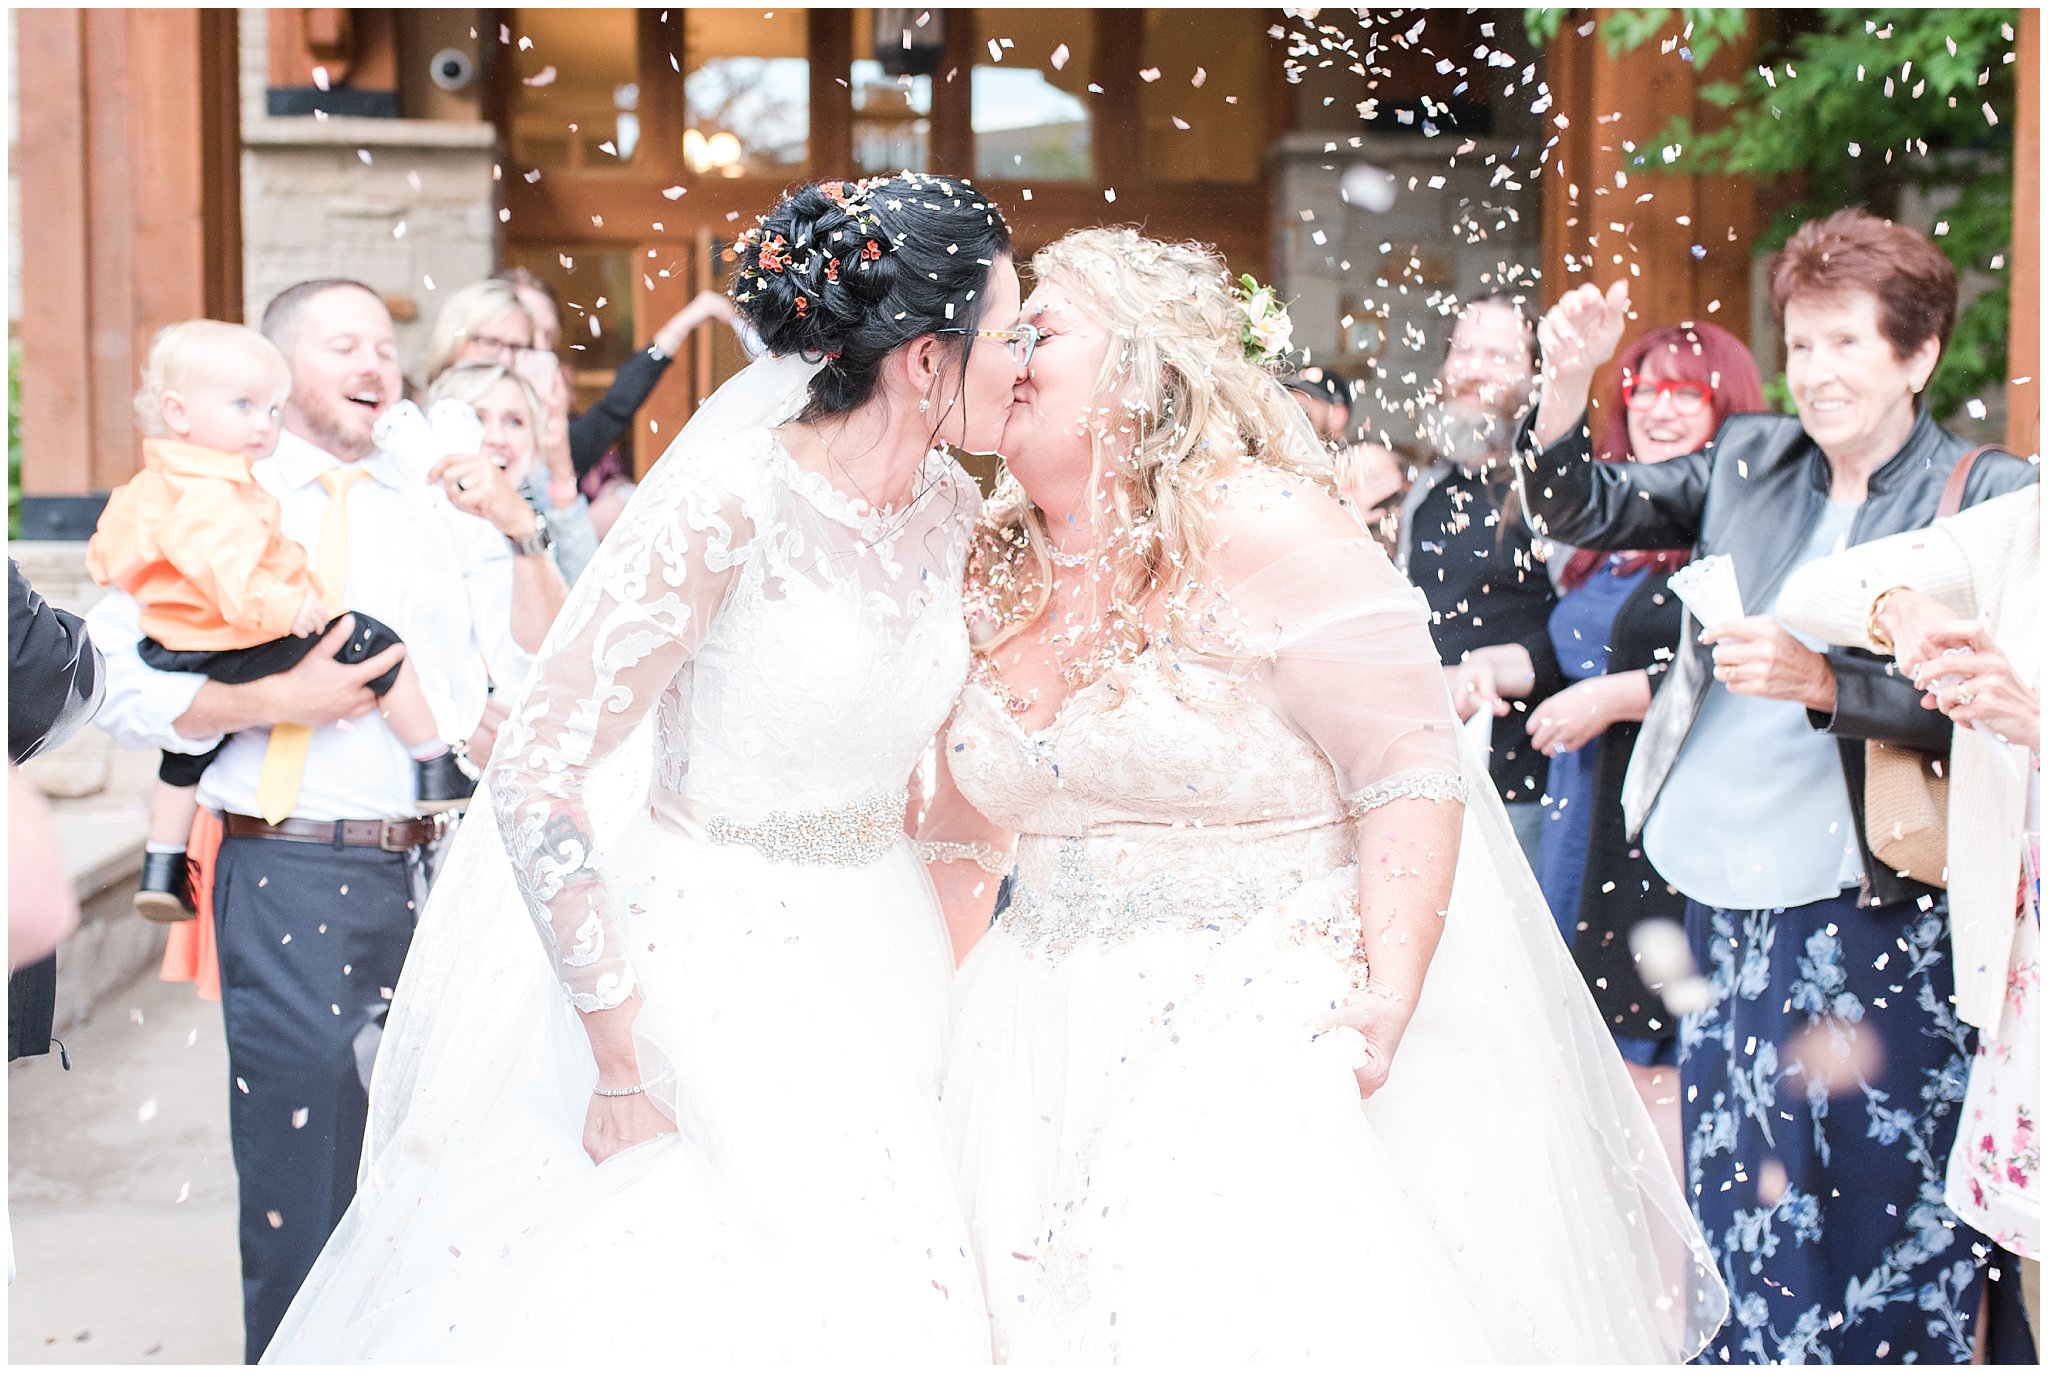 Biodegradable confetti wedding exit | Park City Wedding at the Hyatt Centric | Jessie and Dallin Photography